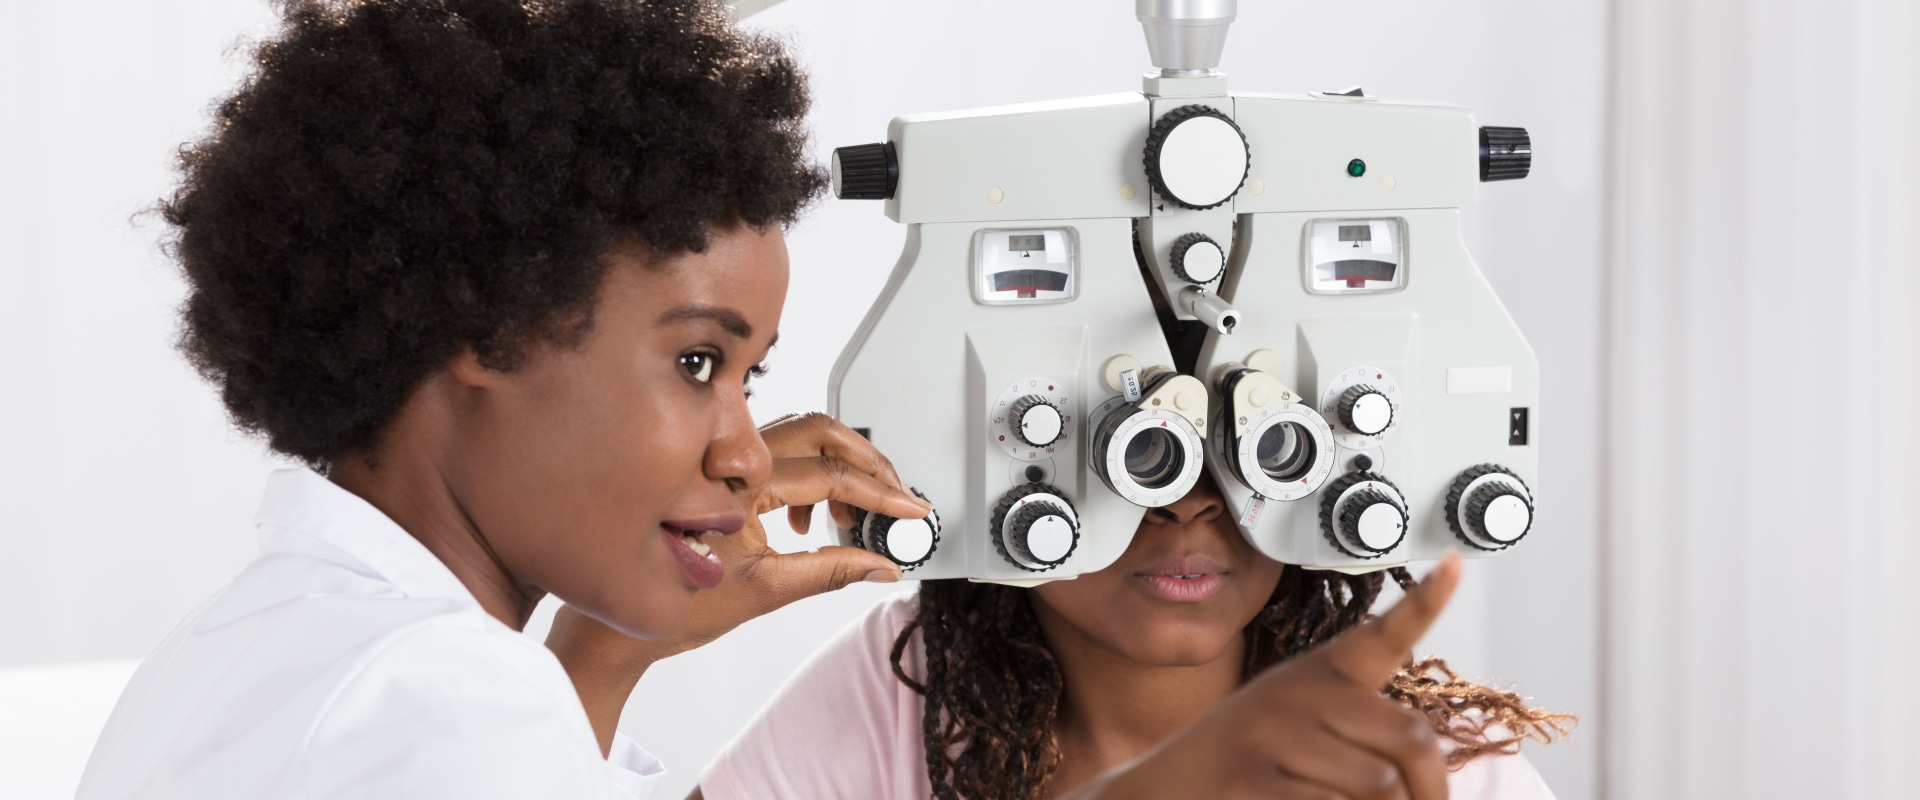 Becoming an Optometrist: Requirements and Benefits